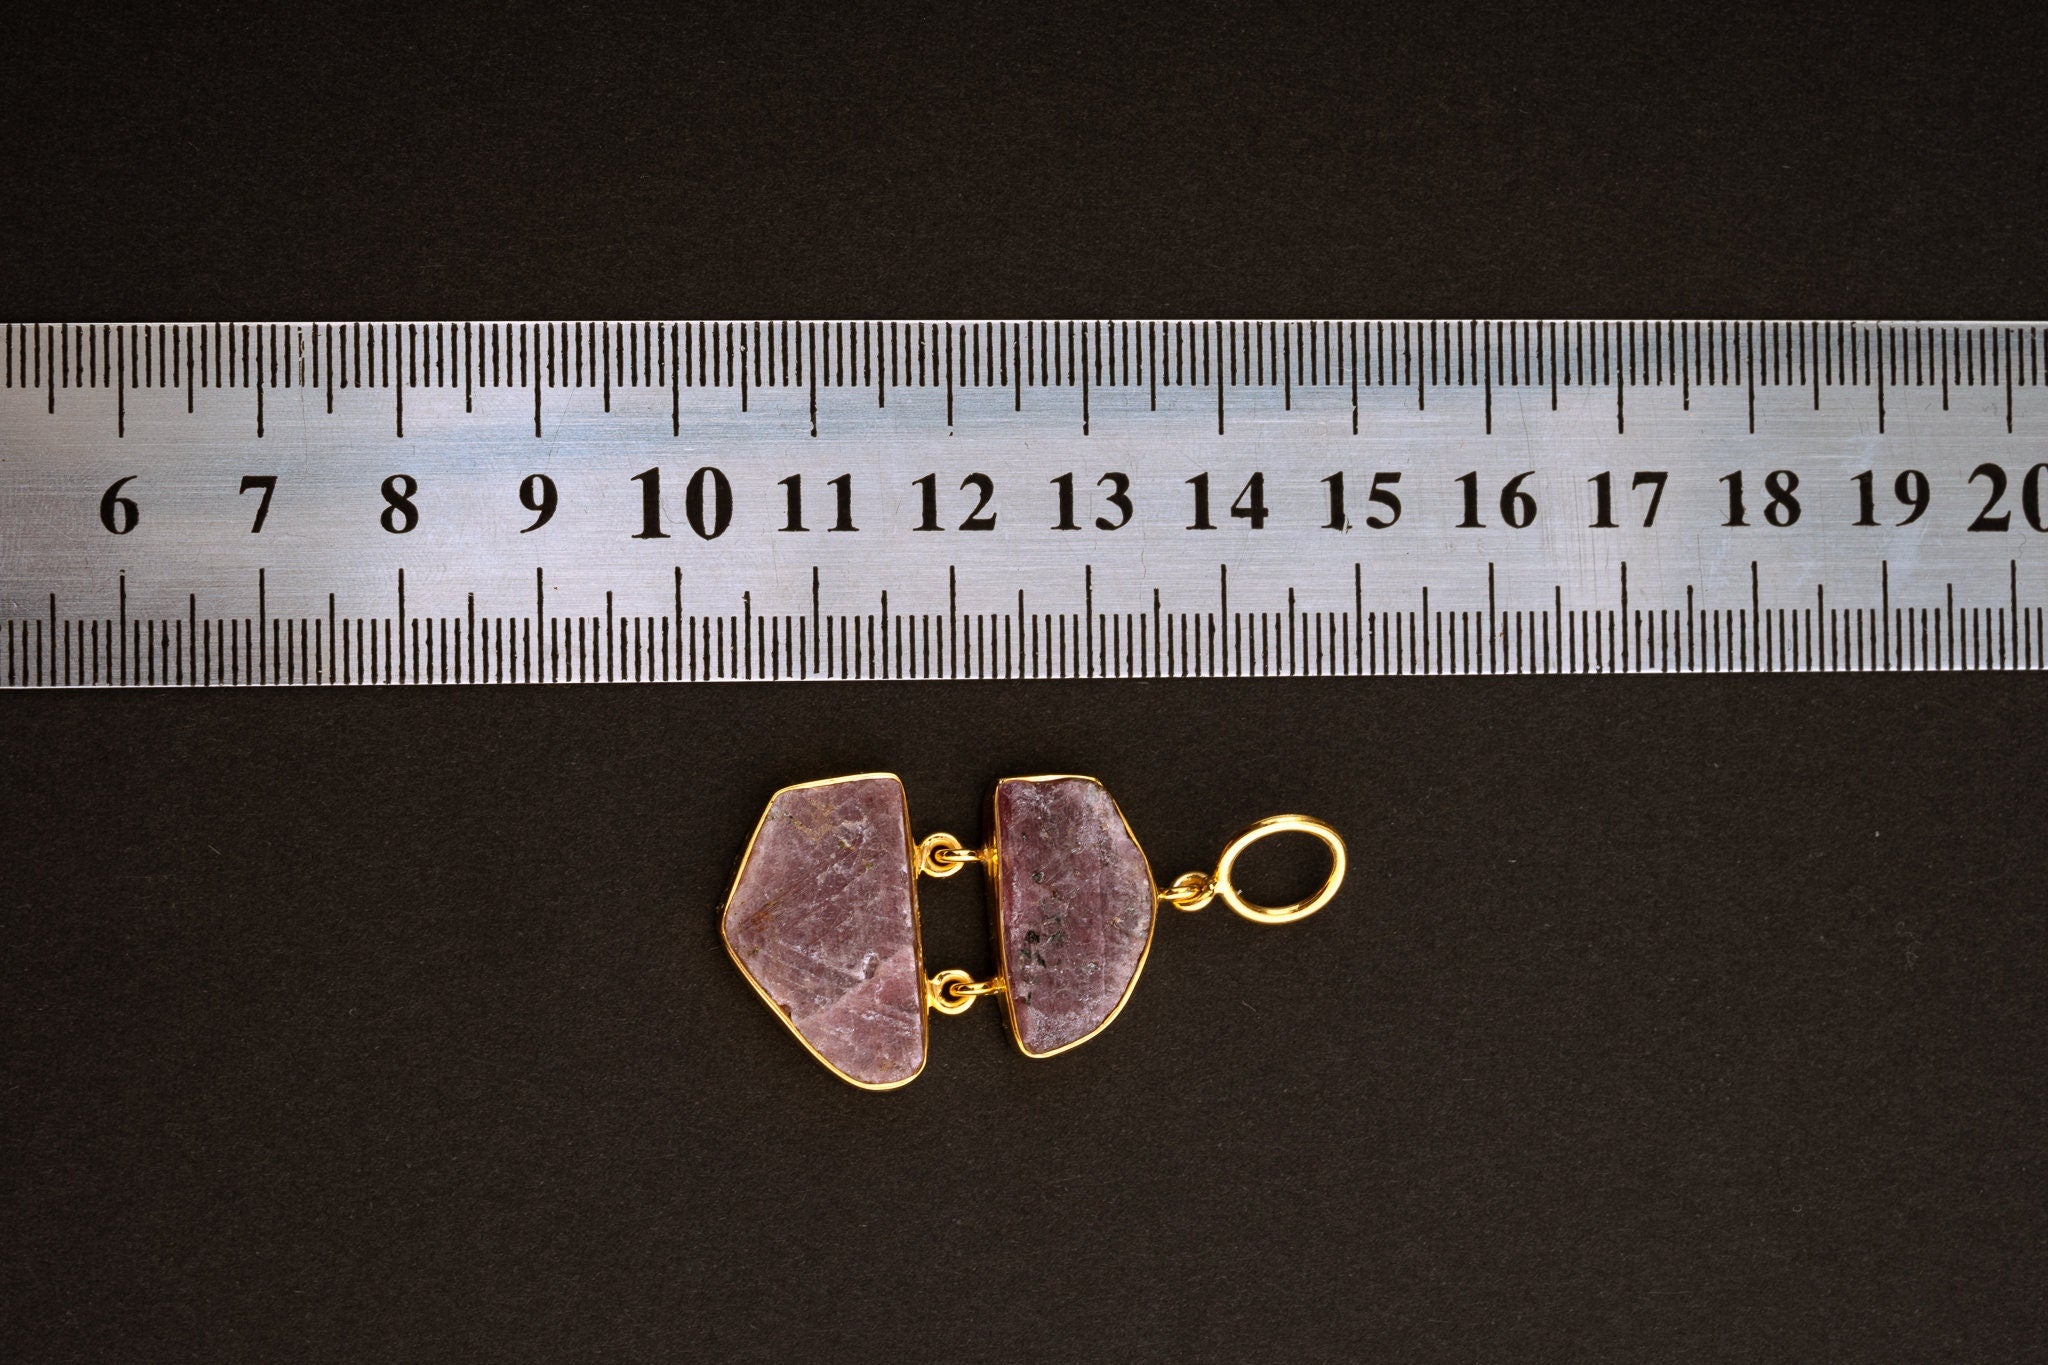 Matching natural Indian Rubies with record keepers & black Mica connected Pendant - Gold Plated Sterling Silver - Crystal Necklace